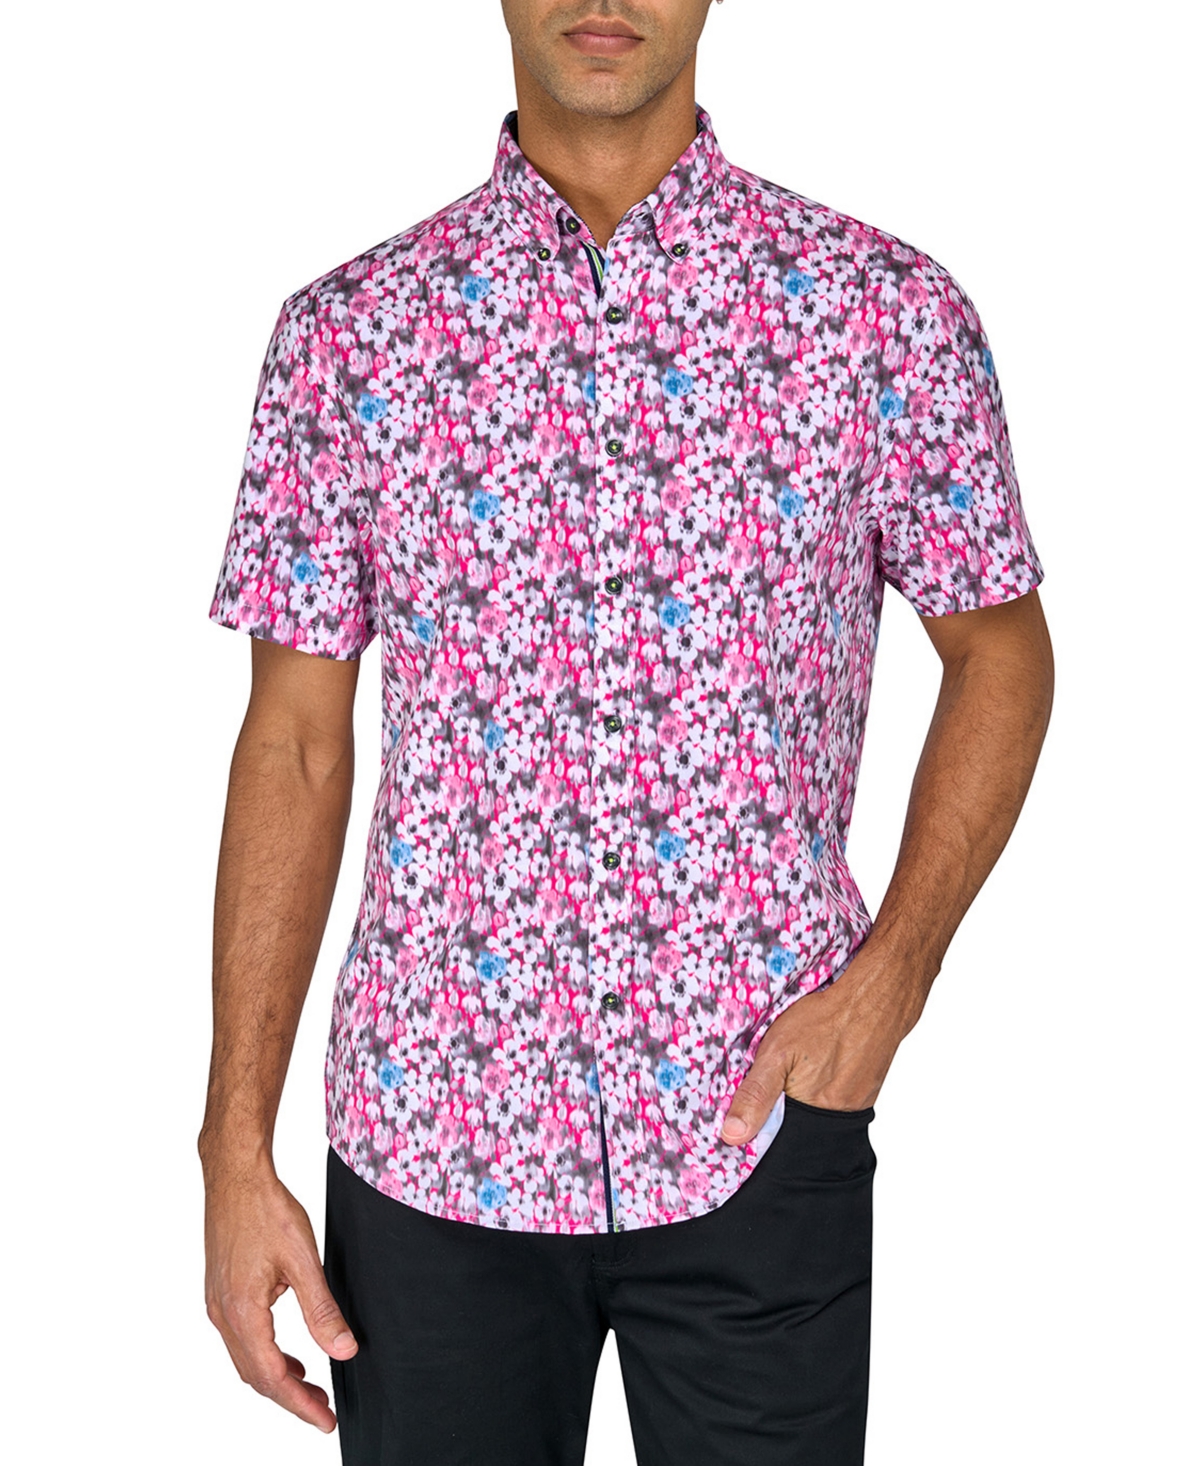 Men's Regular-Fit Non-Iron Performance Stretch Blurred Floral Button-Down Shirt - Pink